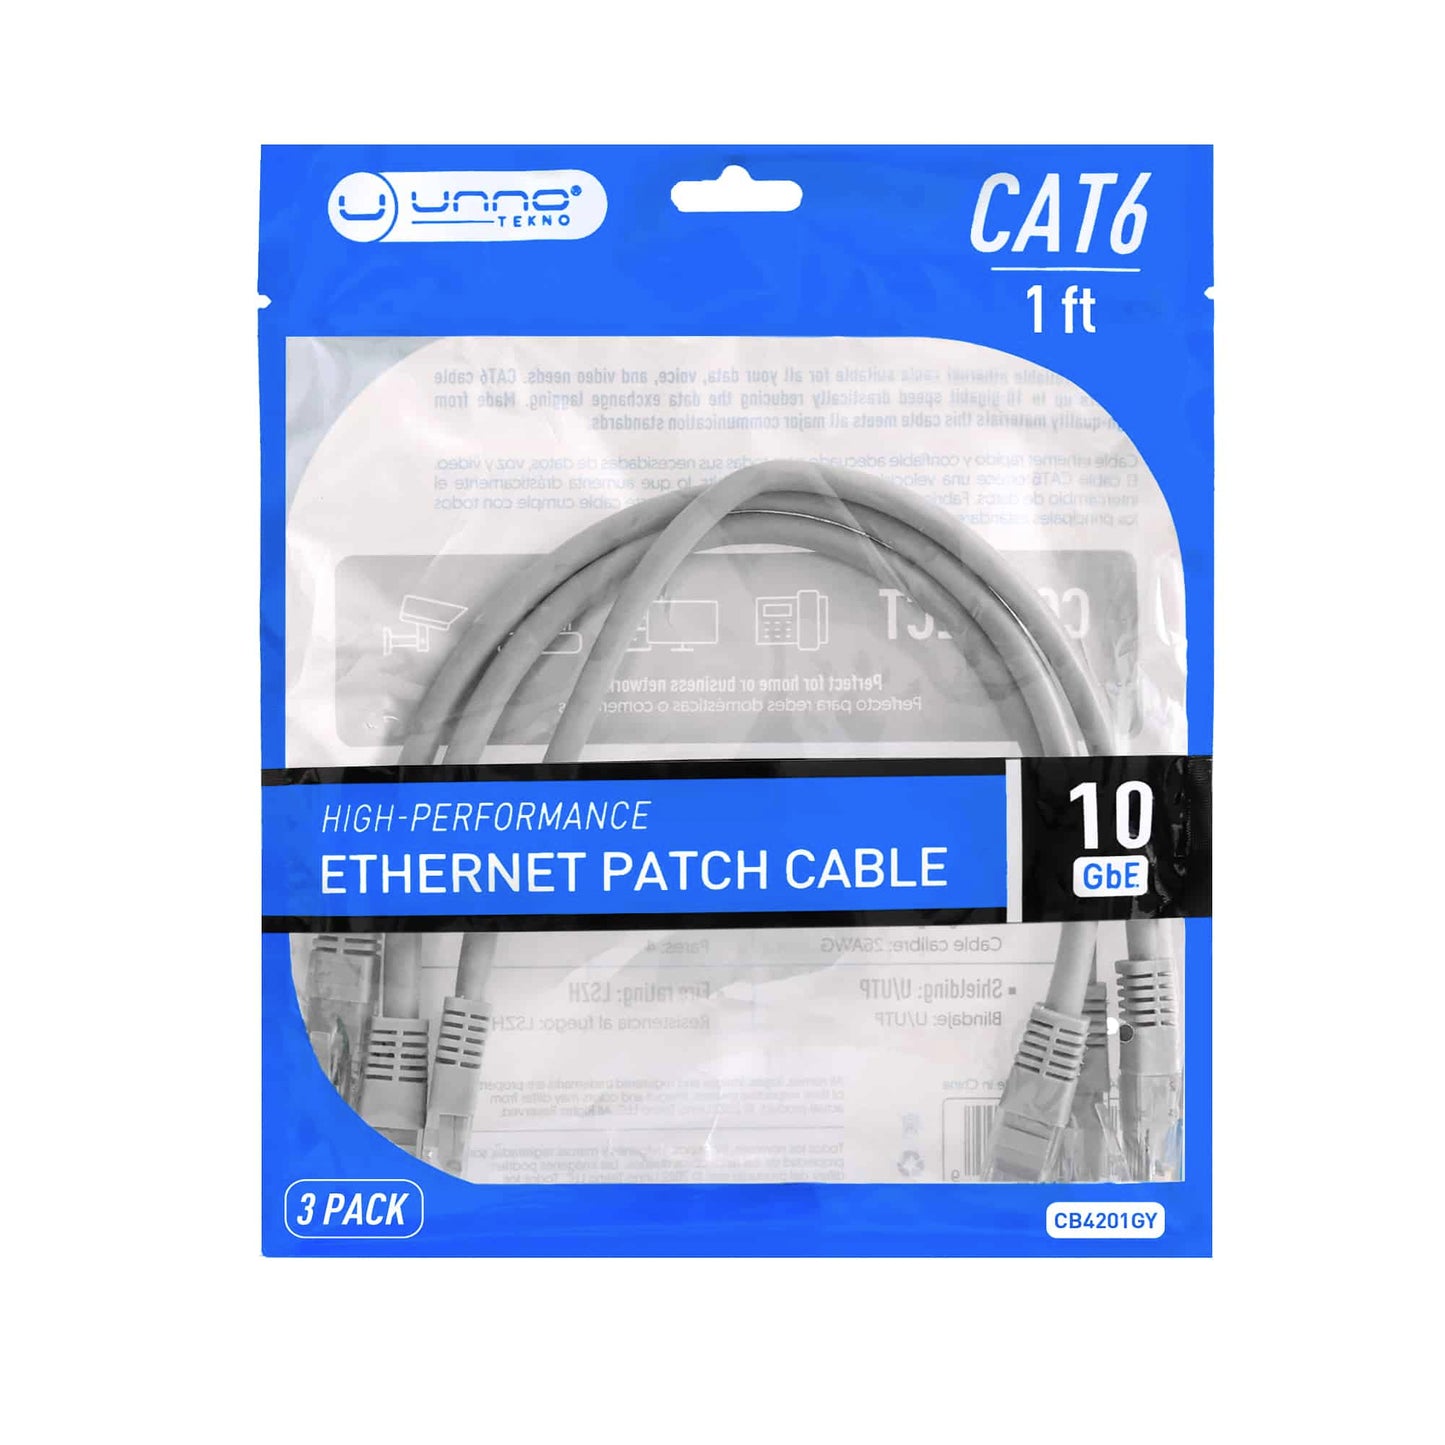 ETHERNET PATCH CABLE CAT6 (3 PACK) | 1 FT - ShopLibertyStore.com